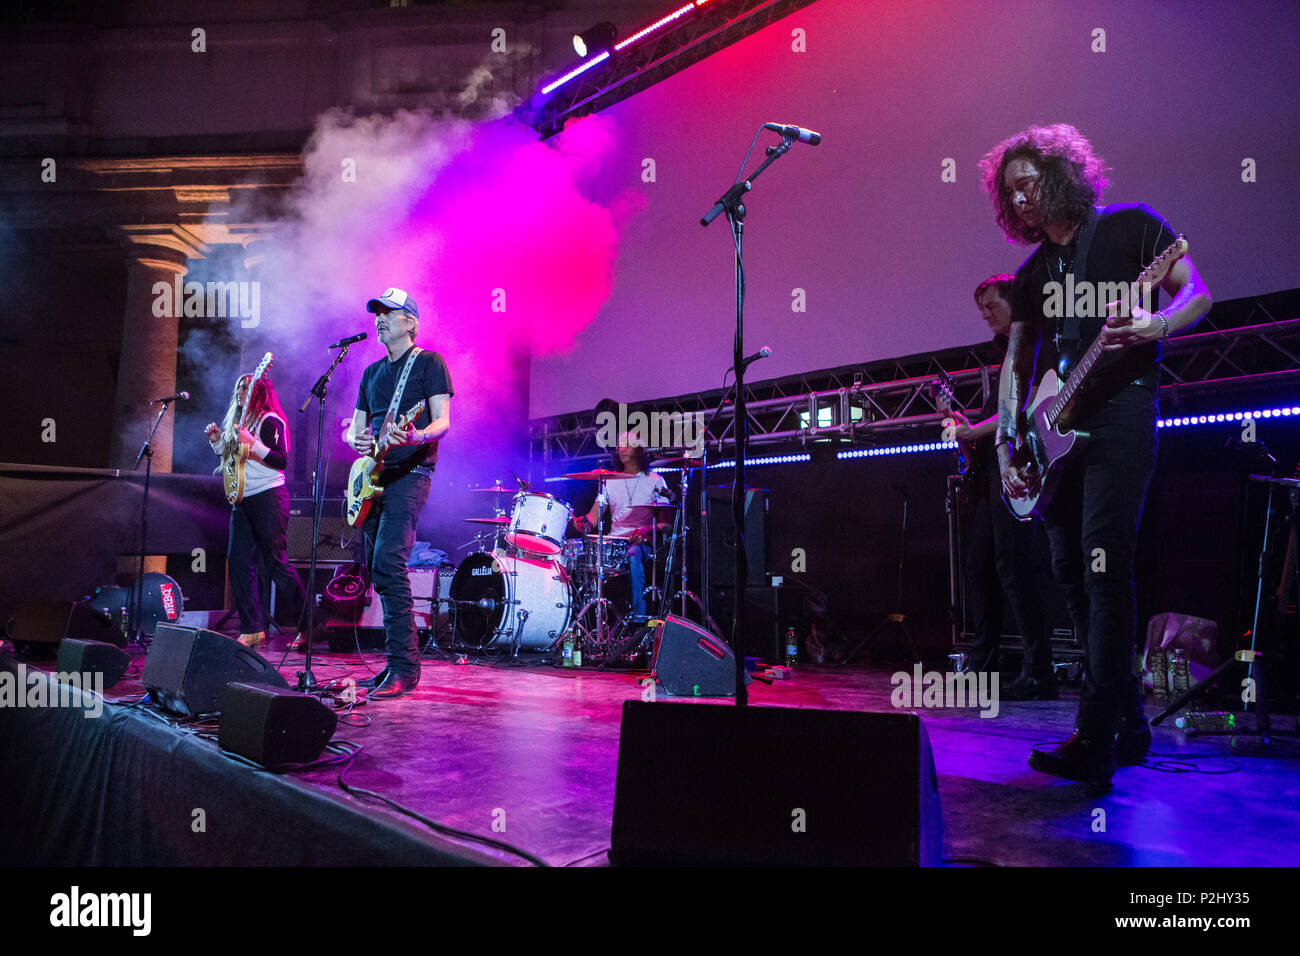 Milan Italy. 13 June 2018. The American alternative rock band GIANT SAND performs live on stage at Palazzo Litta. Stock Photo